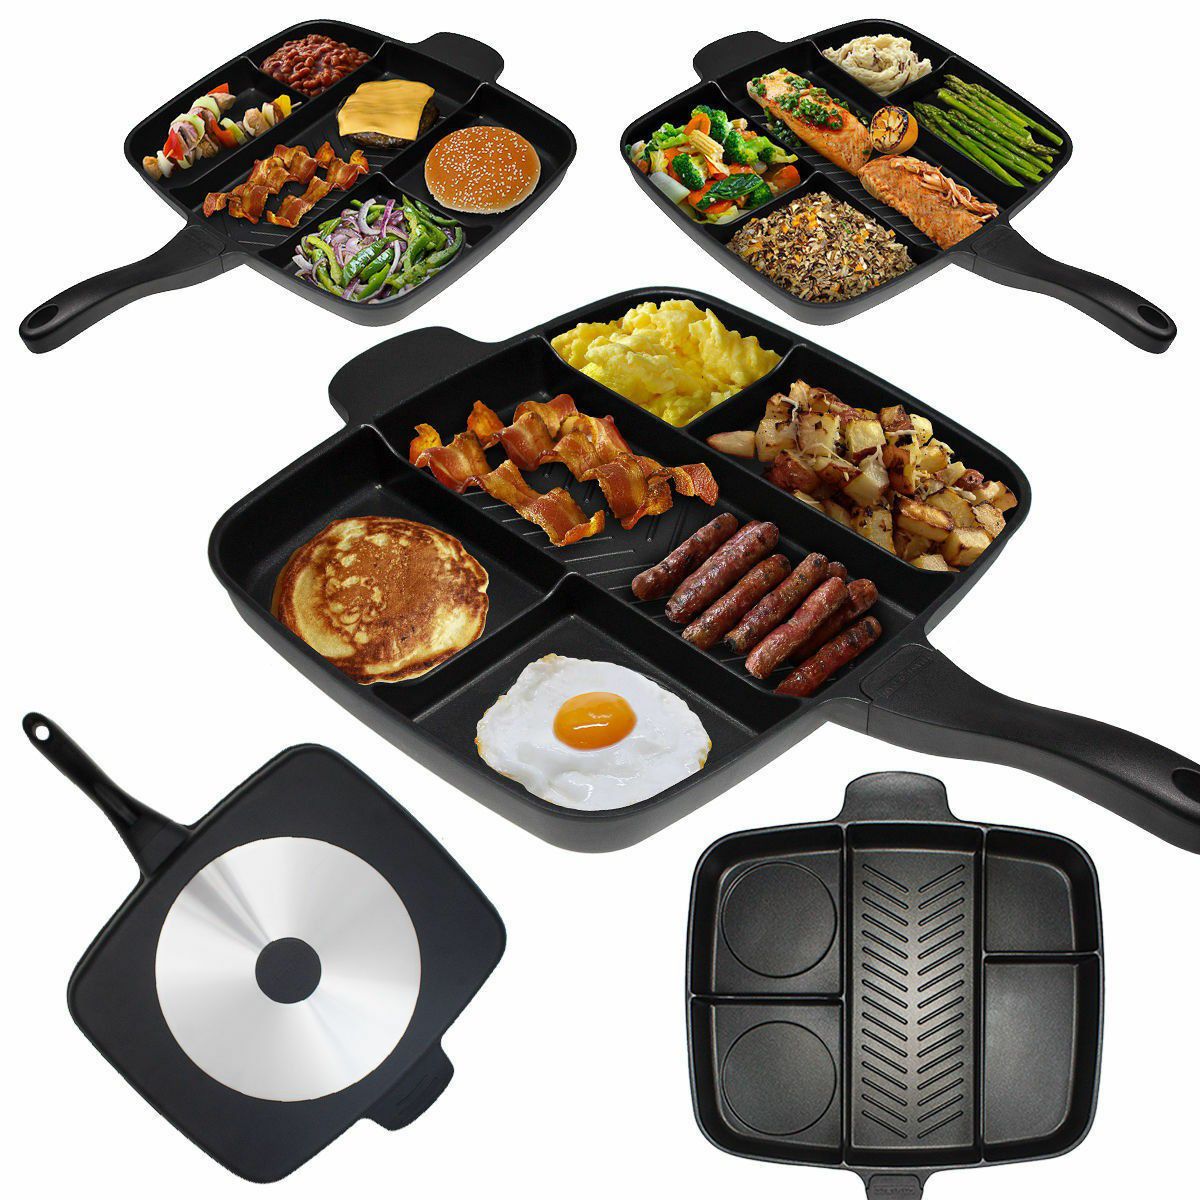 15" Divided pan Gill try oven Multi-sectional skillet non Stick cooking pan .NEW